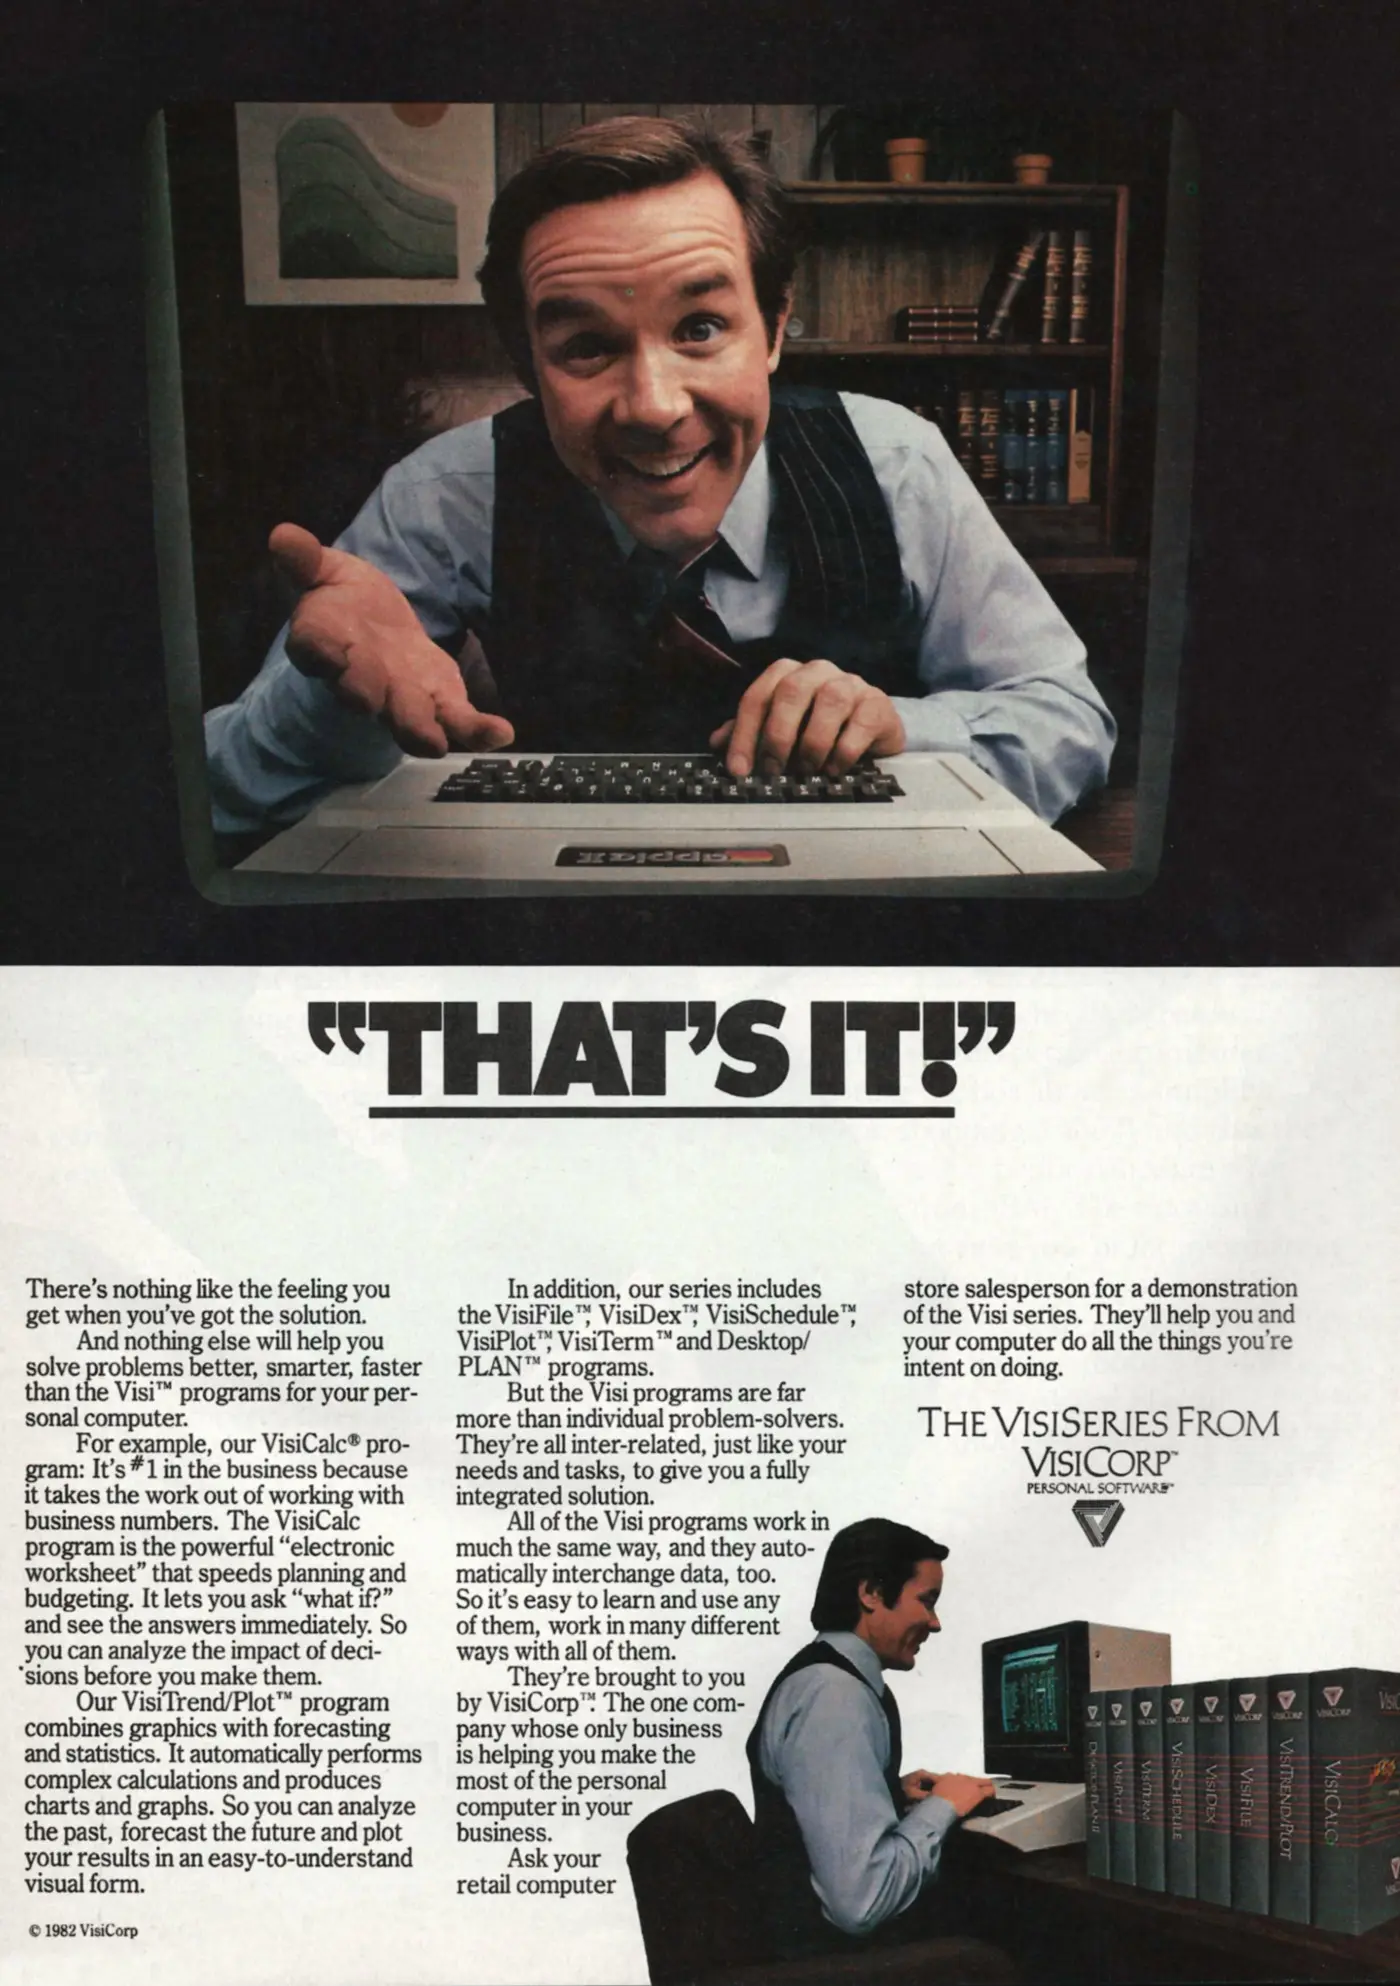 VisiCorp Advert: That's it! The VisiSeries from VisiCorp, from Personal Computing, May 1982